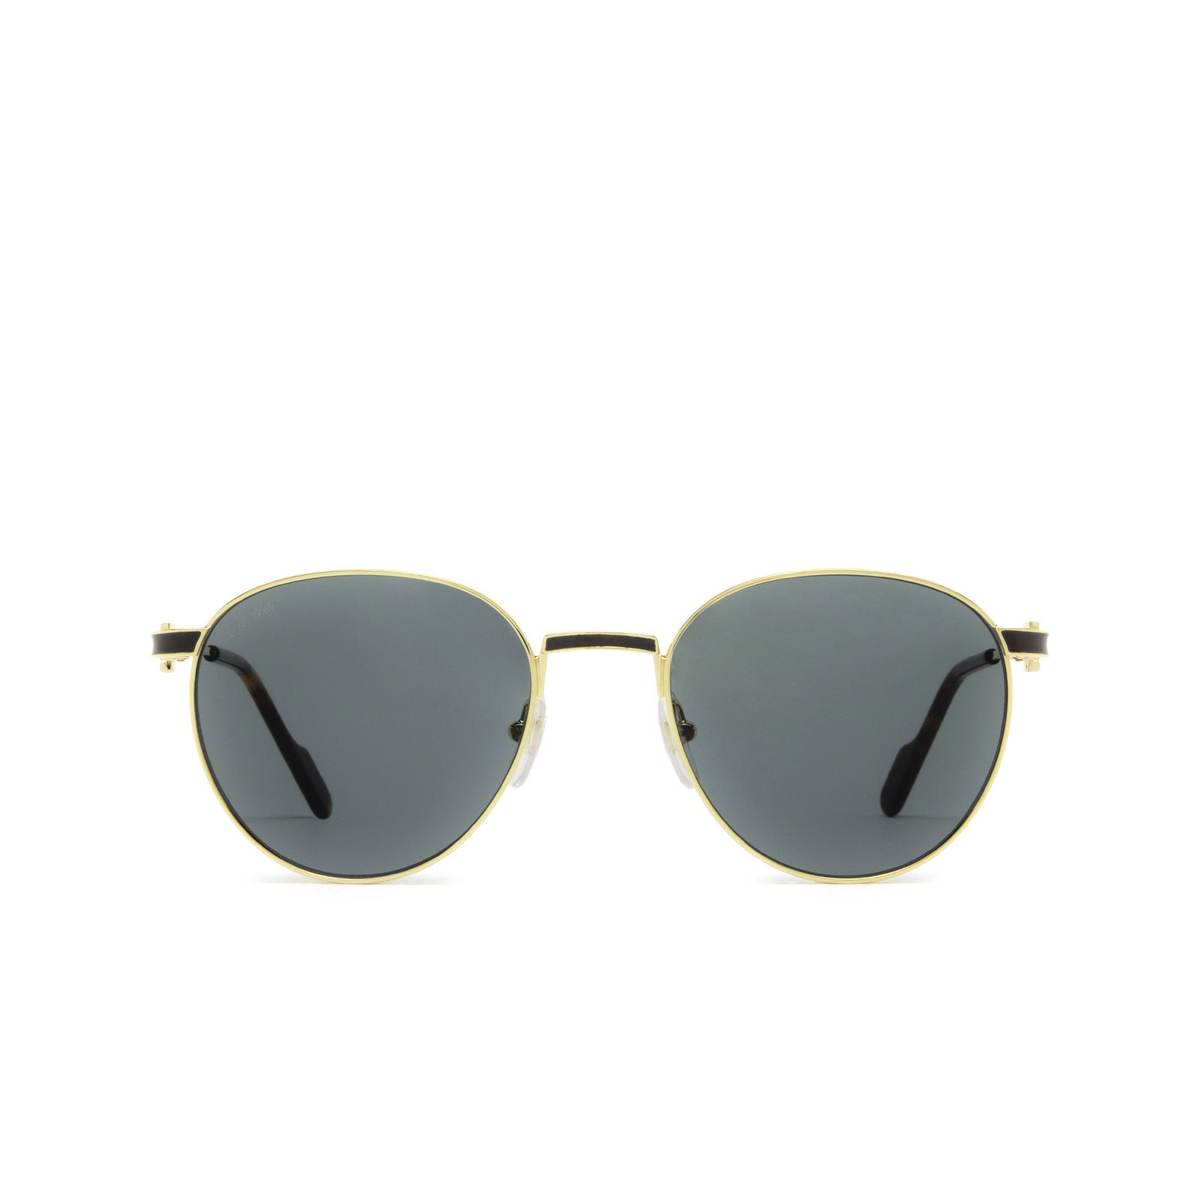 Cartier® Round Sunglasses: CT0335S color Gold 002 - front view.